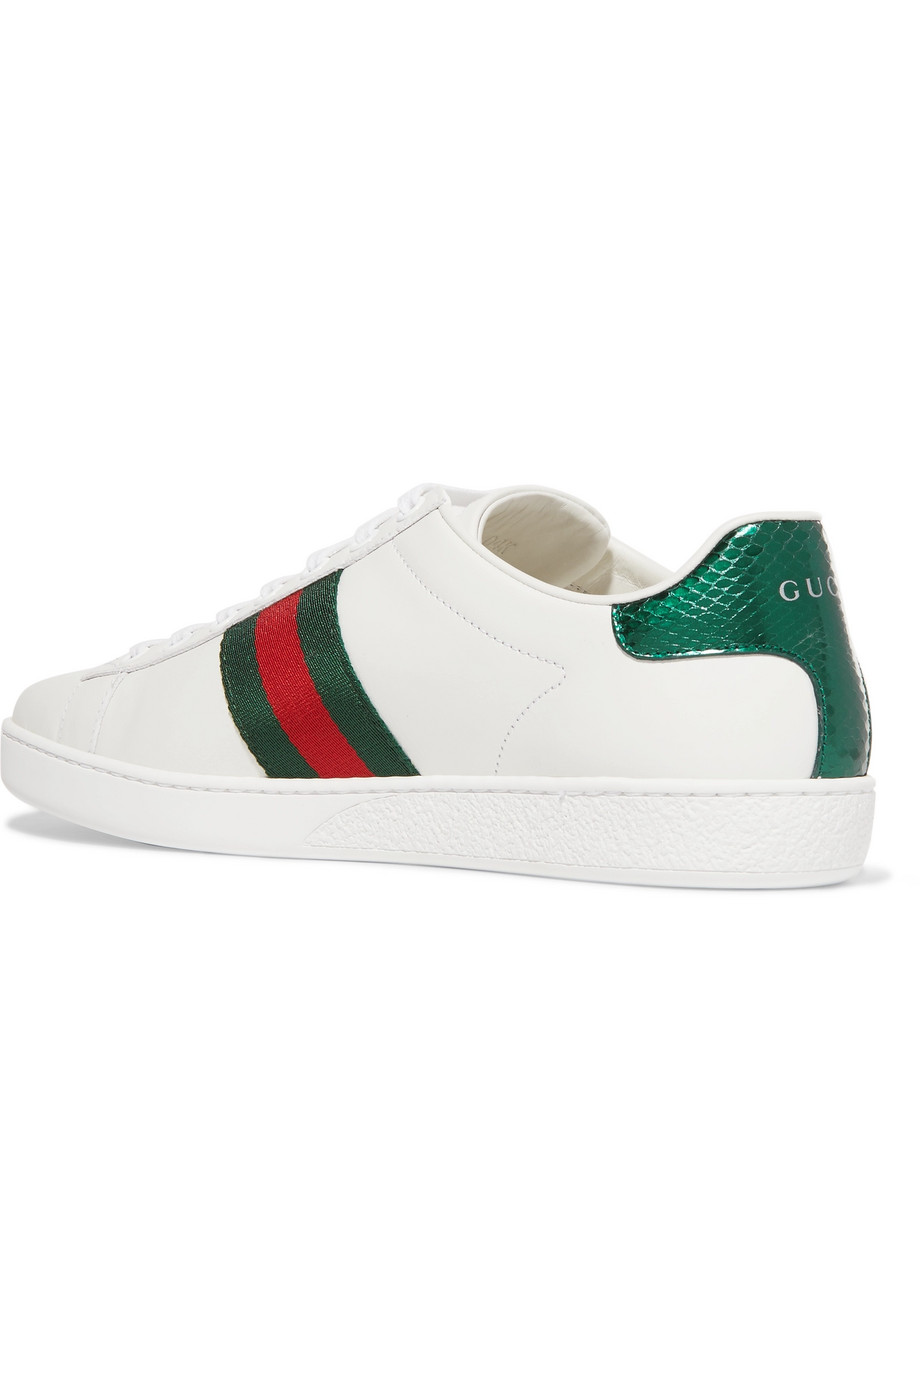 gucci sneakers ace bee